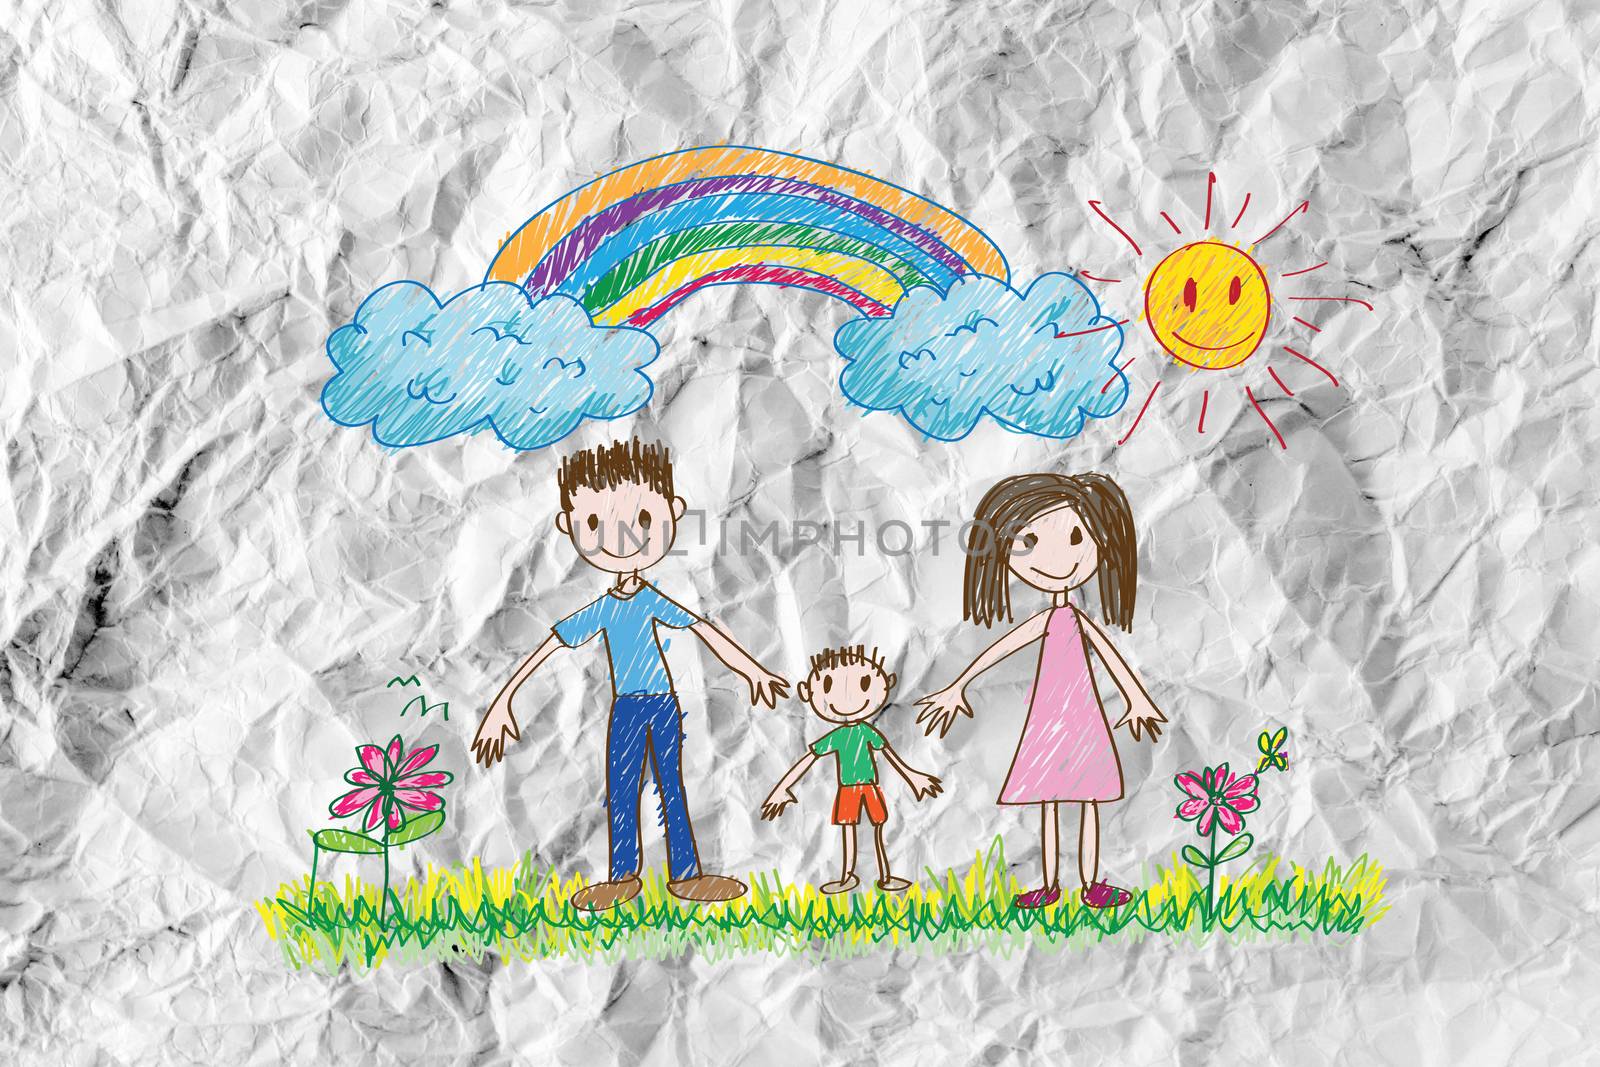 Children's drawings idea design on crumpled paper